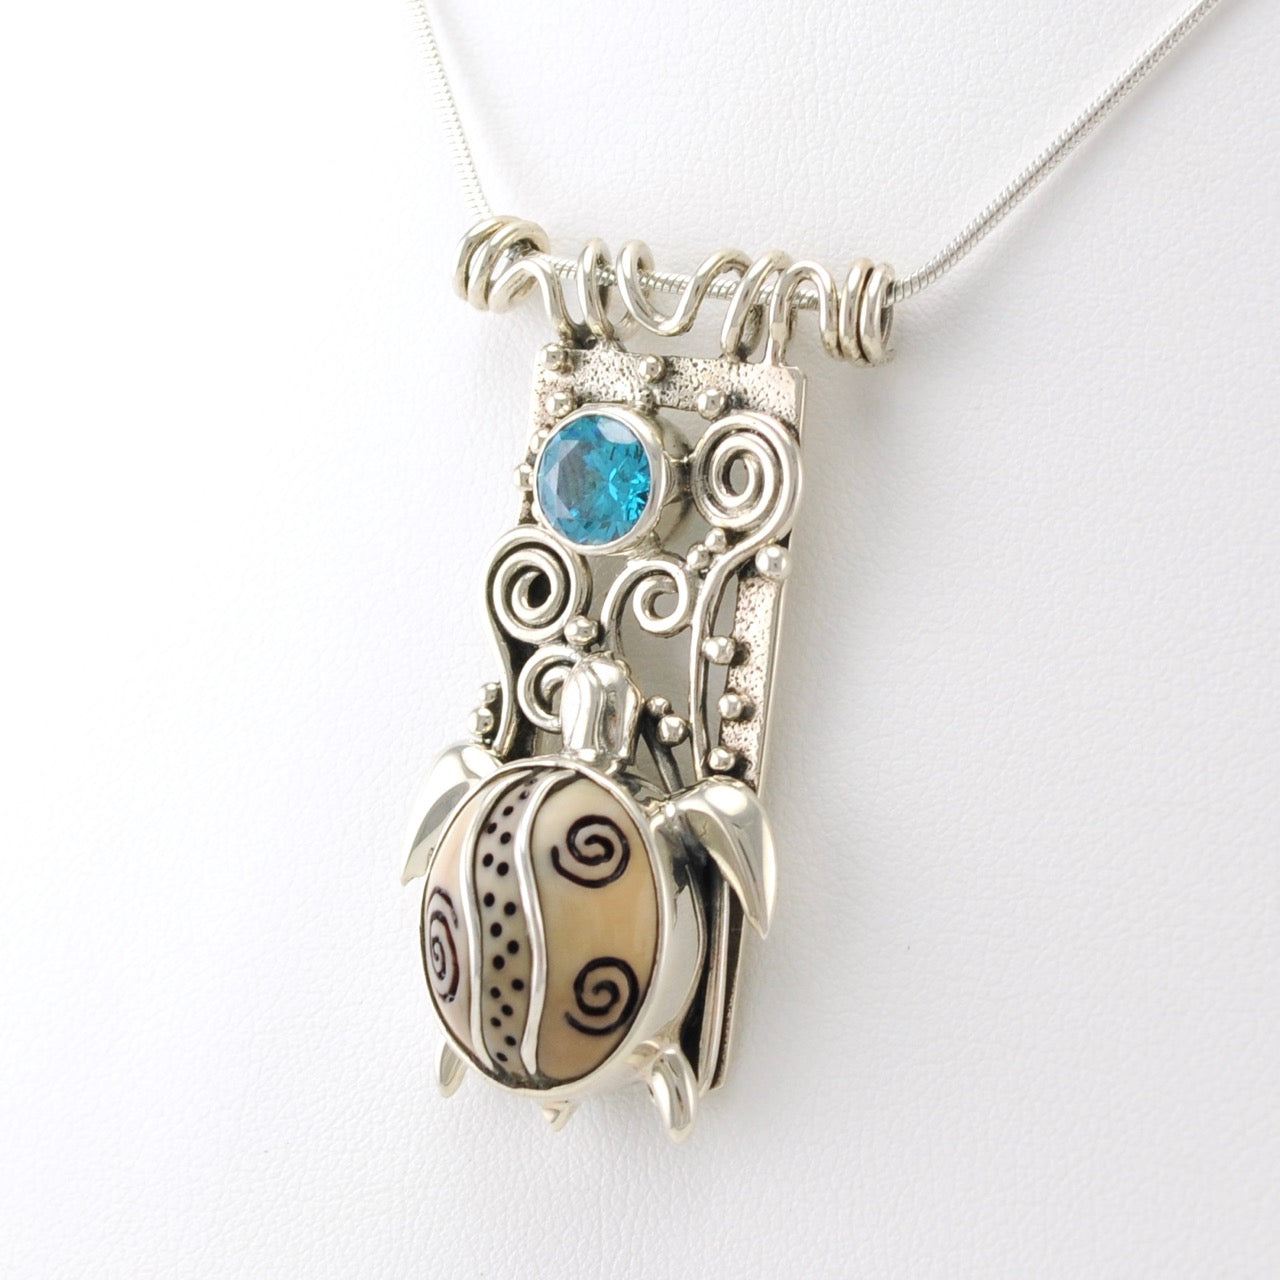 Fossilized Walrus Ivory Tusk Silver Fish Necklace with Blue Topaz